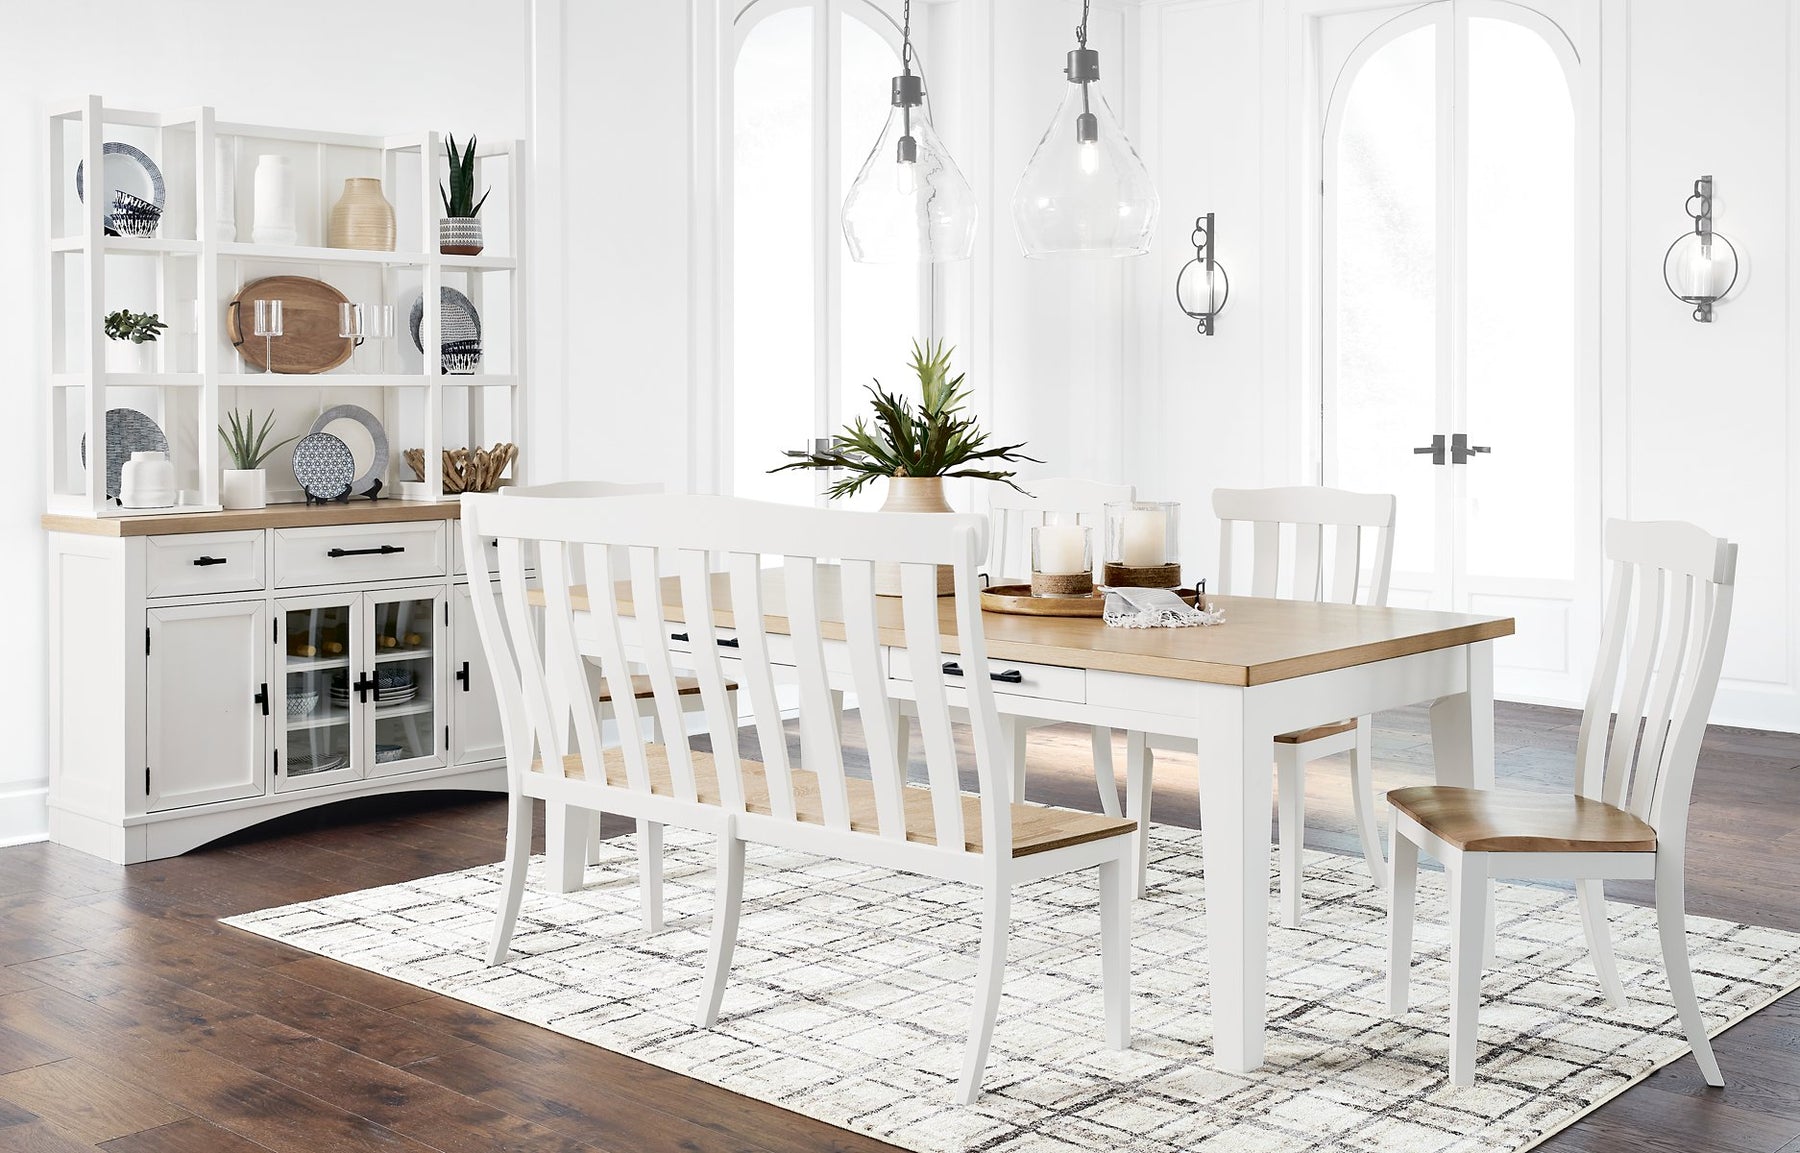 Ashbryn Dining Double Chair - Half Price Furniture